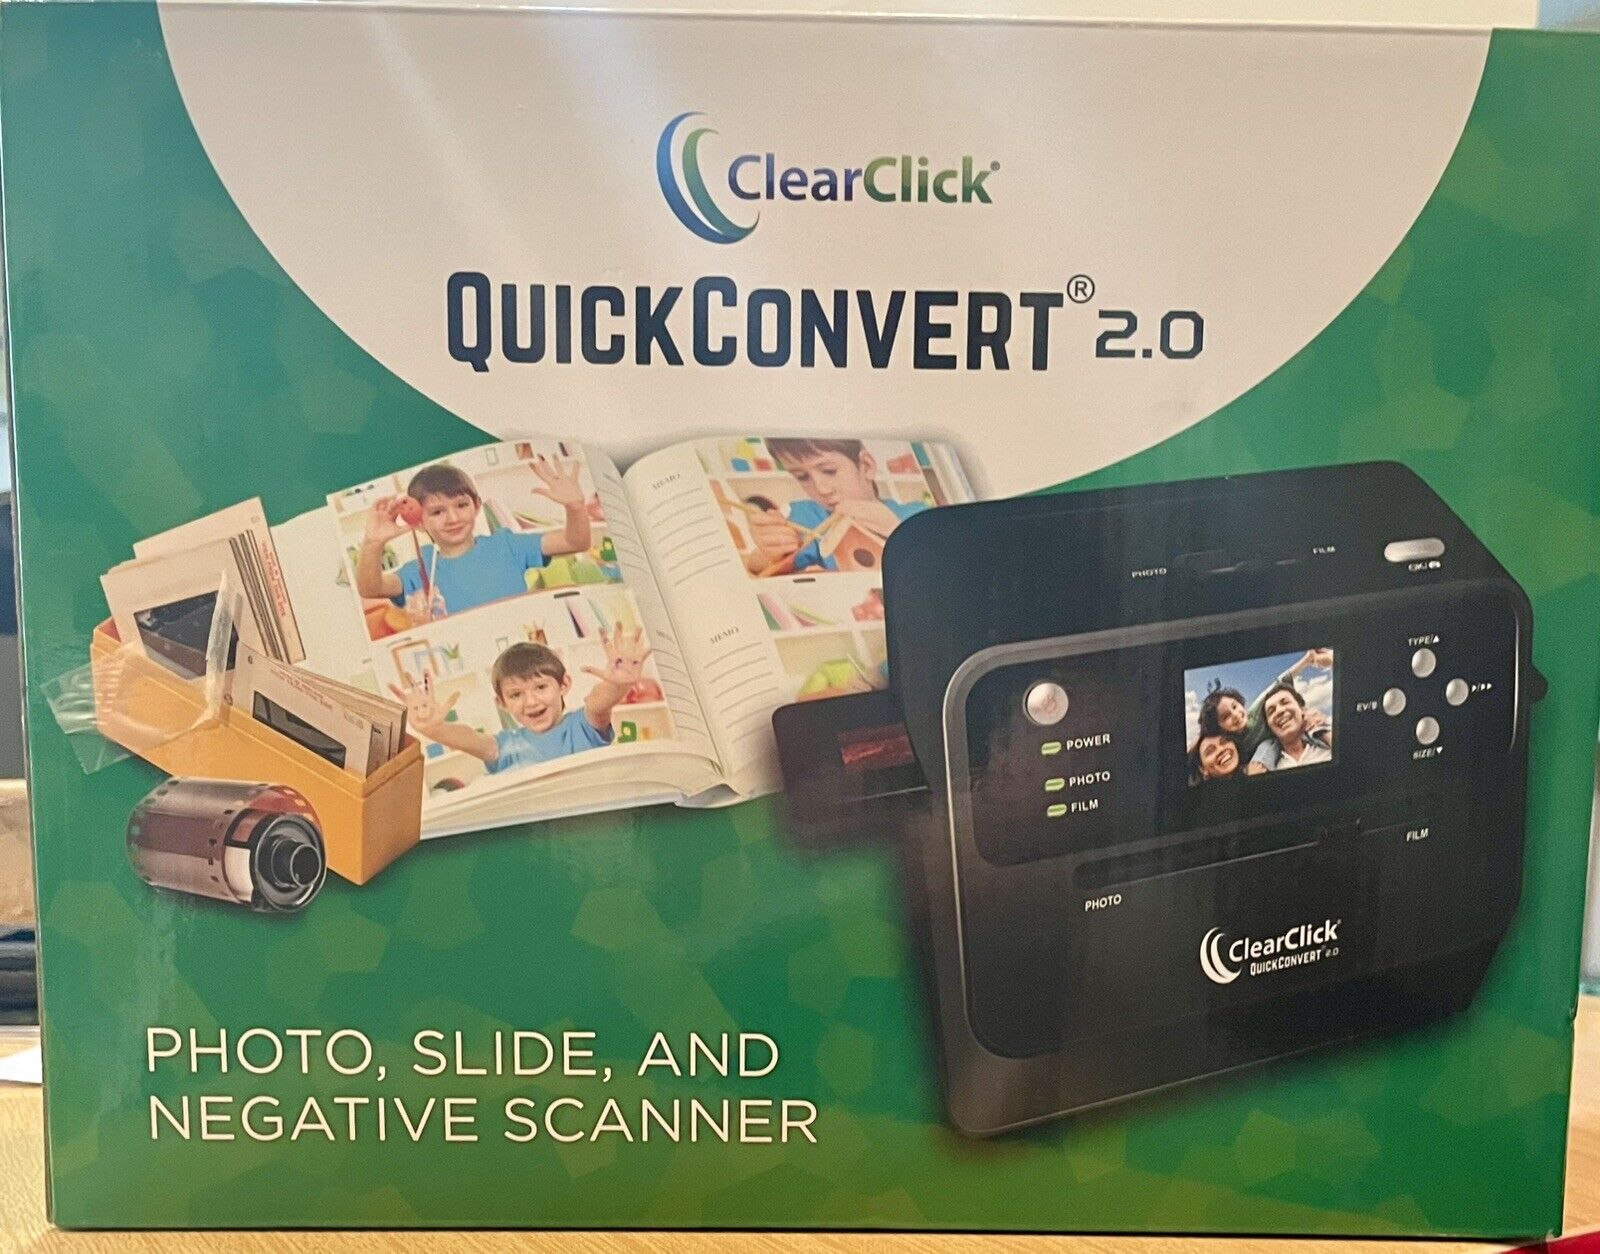 ClearClick QuickConvert 2.0 Portable Photo Slide Film and Negative Scanner